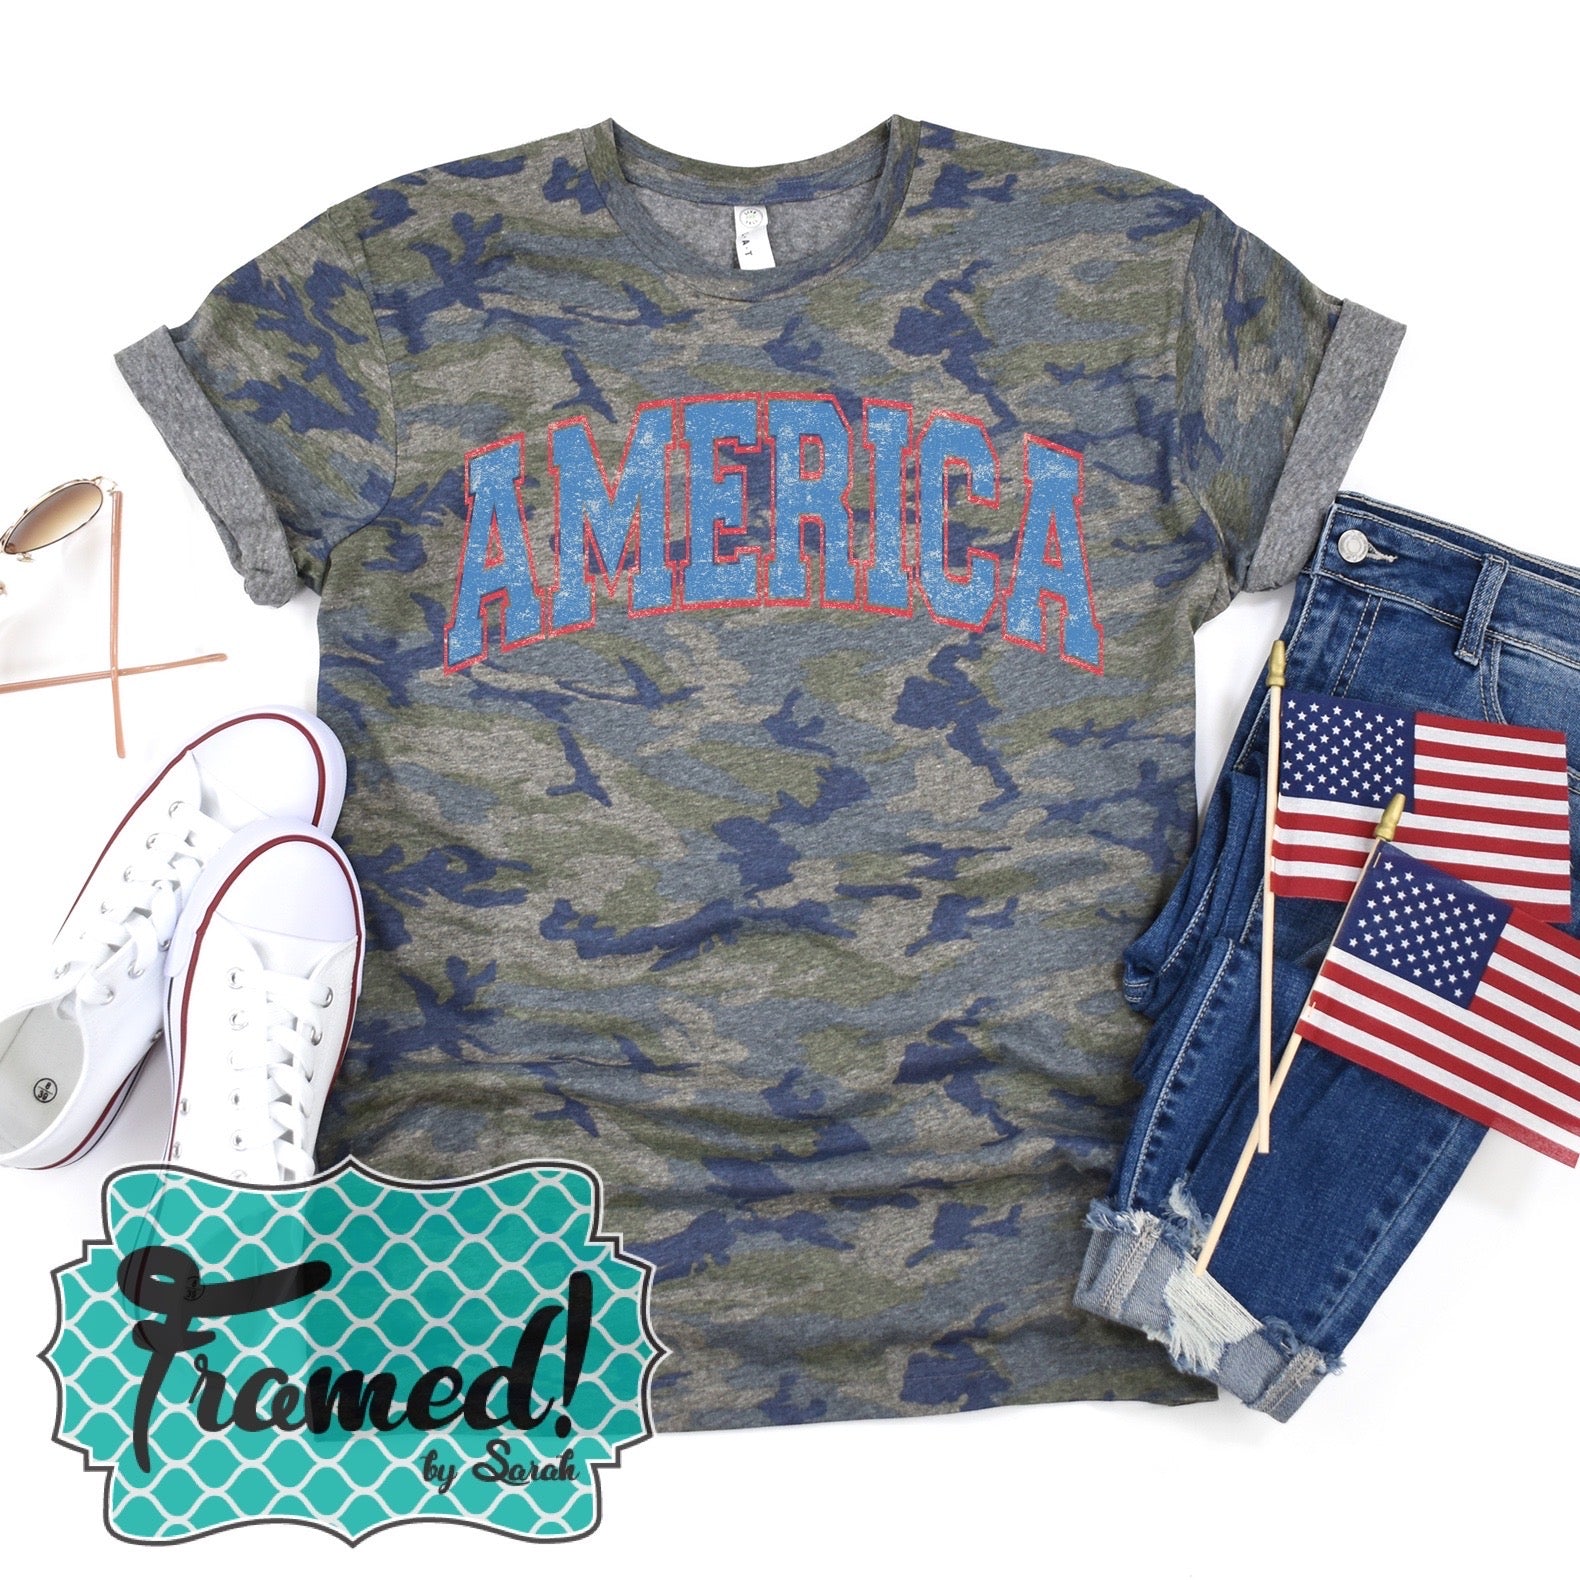 "America" Camo Graphic Tee (Small Only)